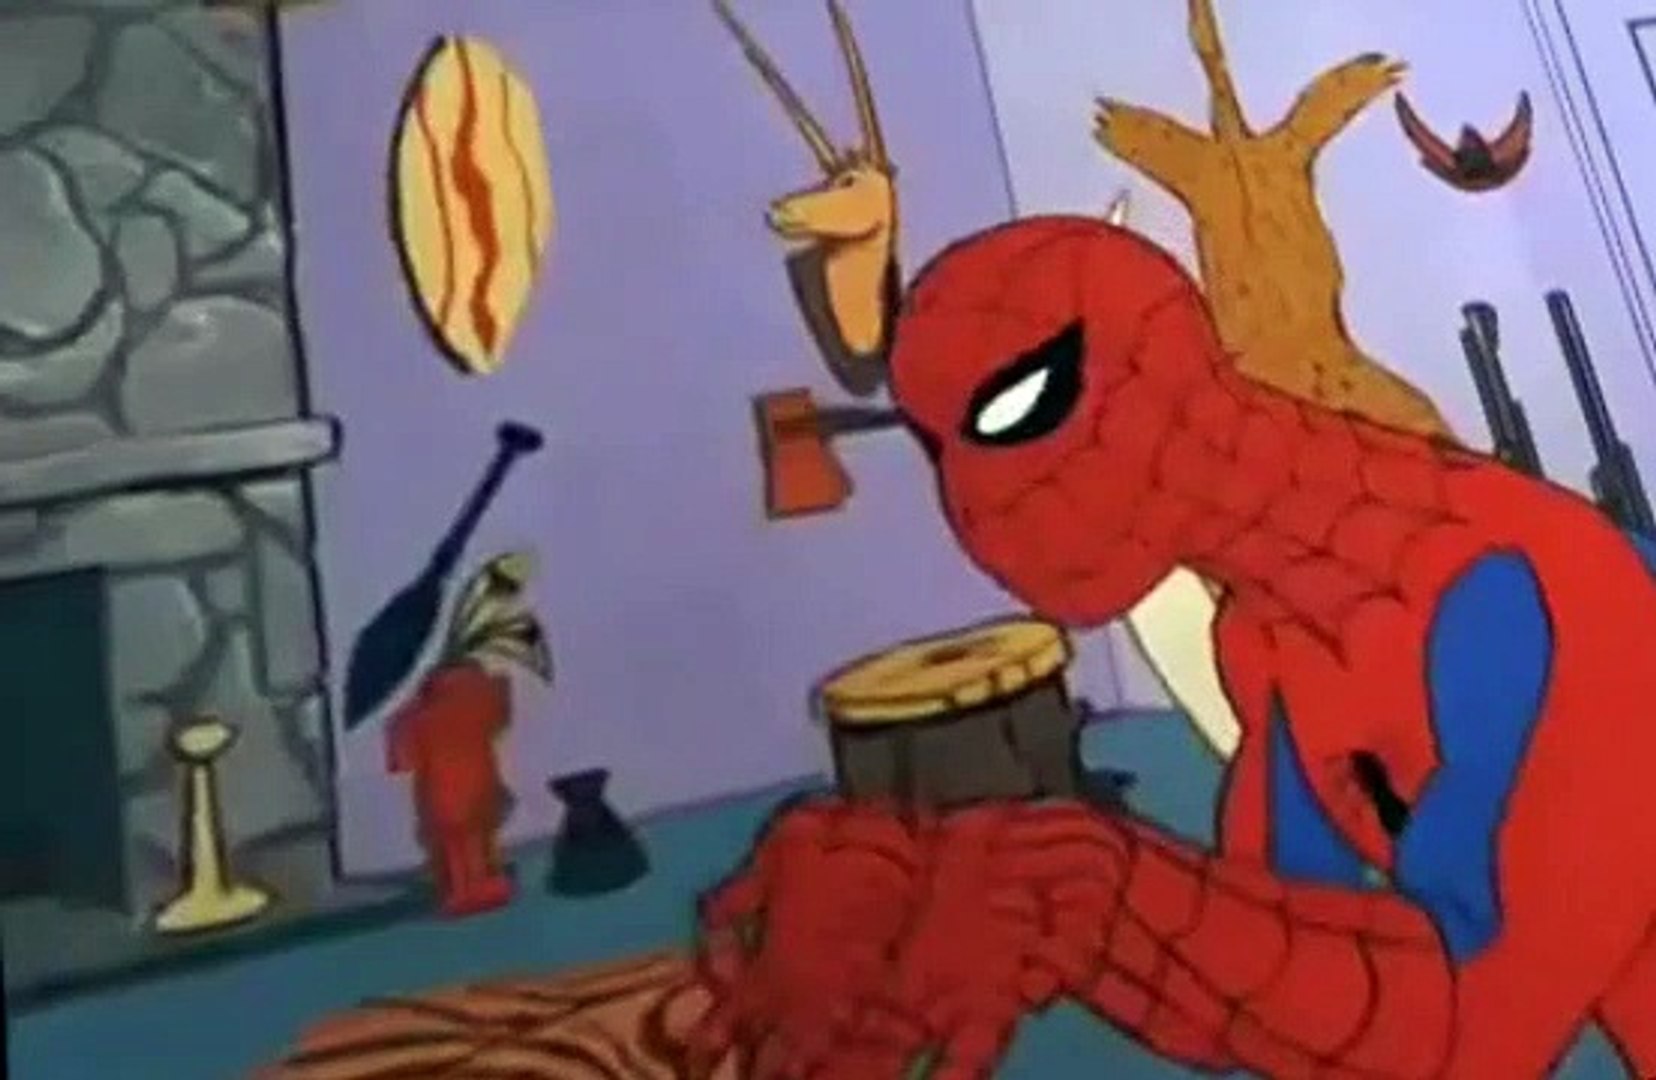 Spider-Man (1967) S01 E009 - video Dailymotion